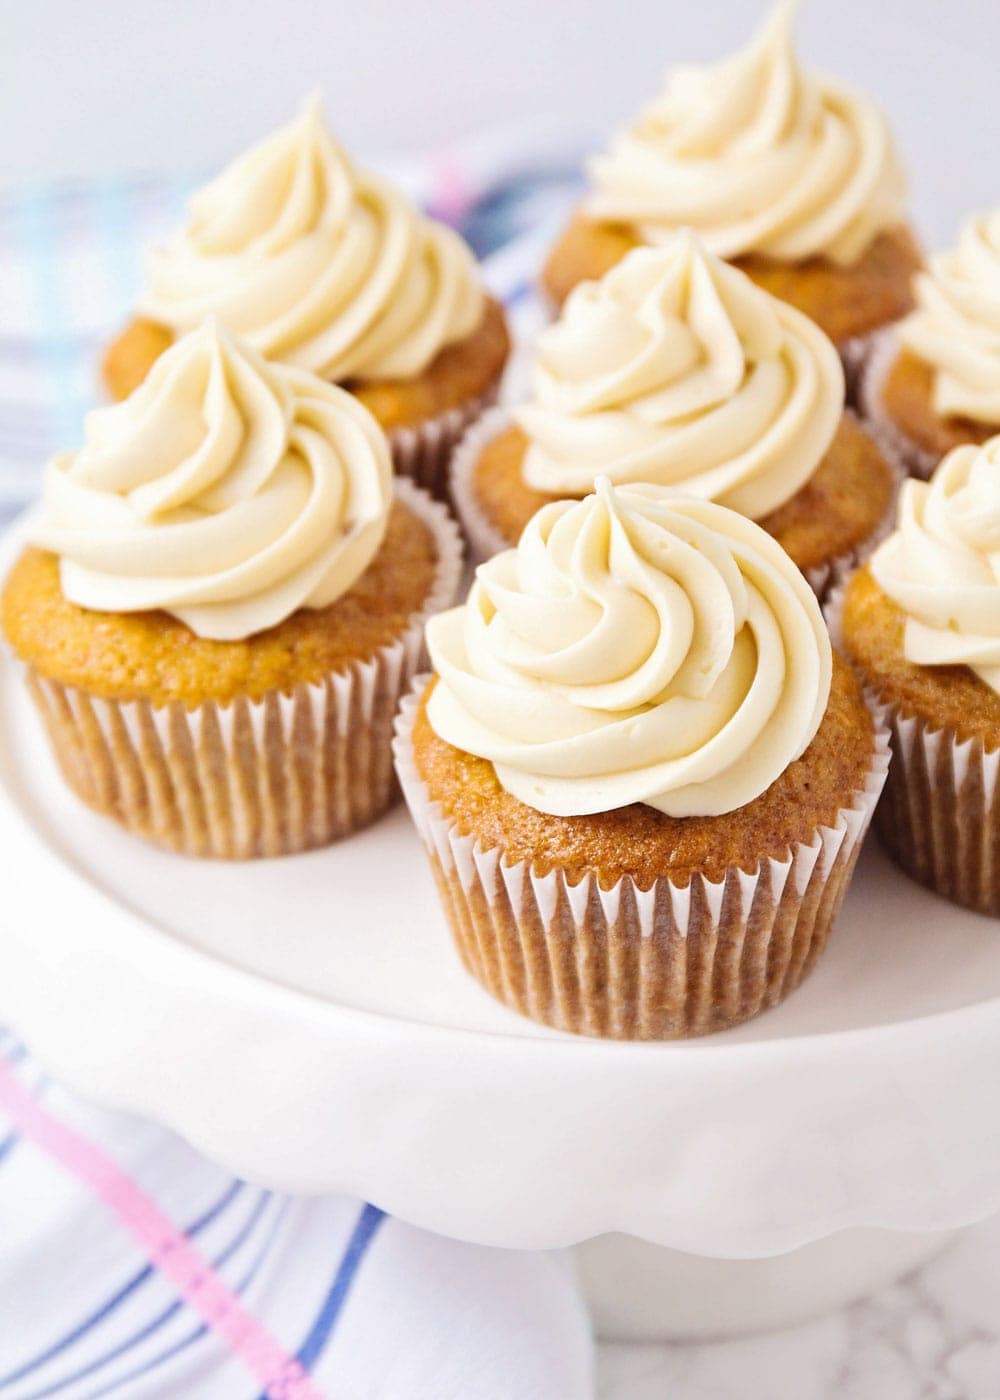 Carrot cake cupcakes recipe on white cake stand topped with brown sugar cream cheese frosting.